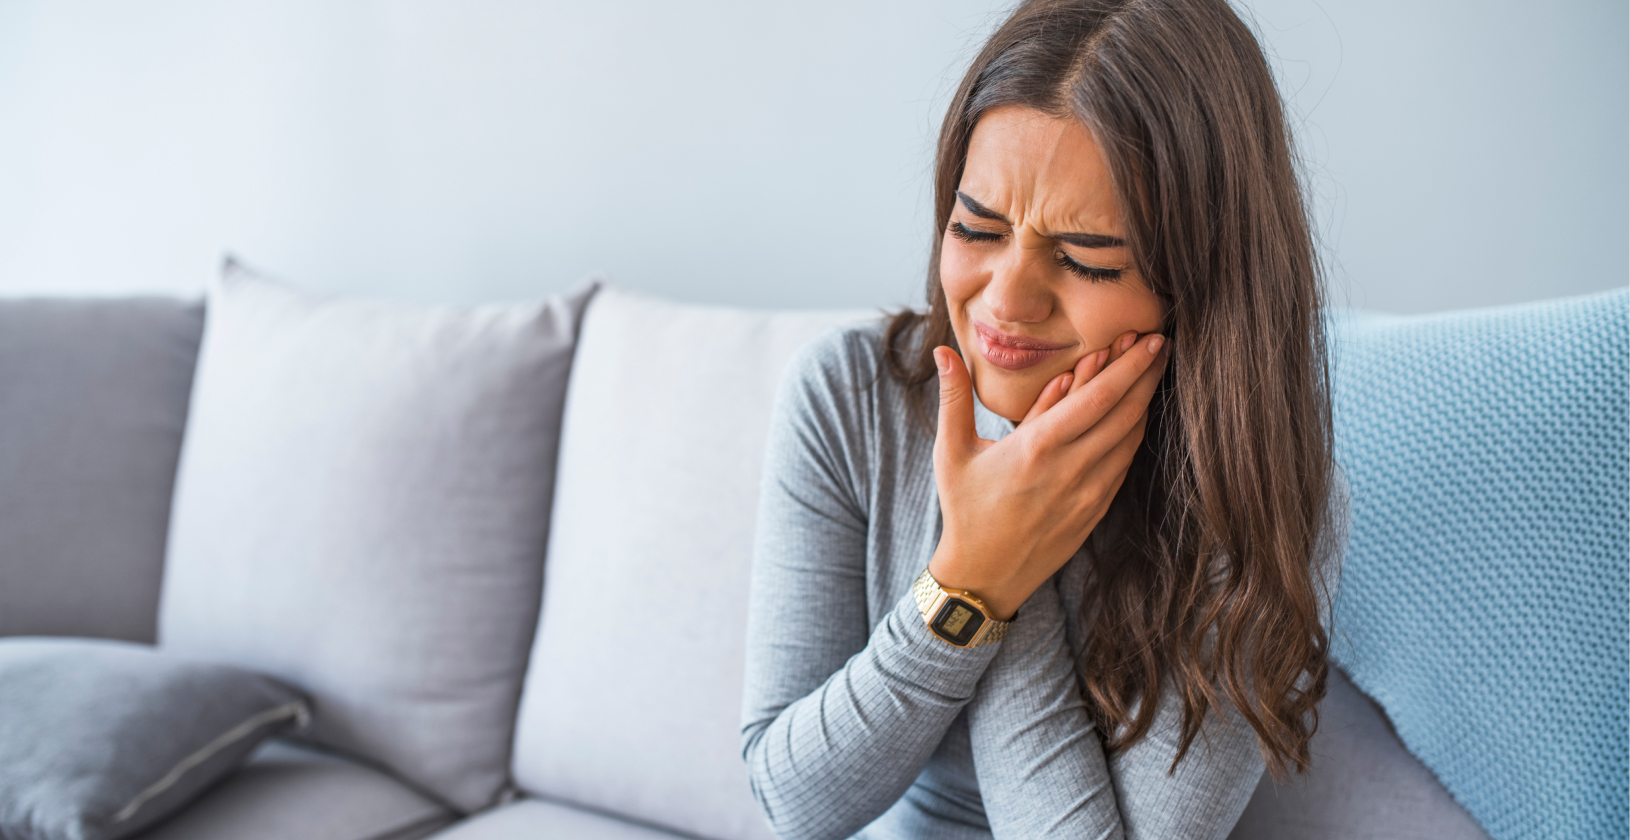 Tandara ﻿﻿Toothaches –Causes and How to Relieve Teeth Pain